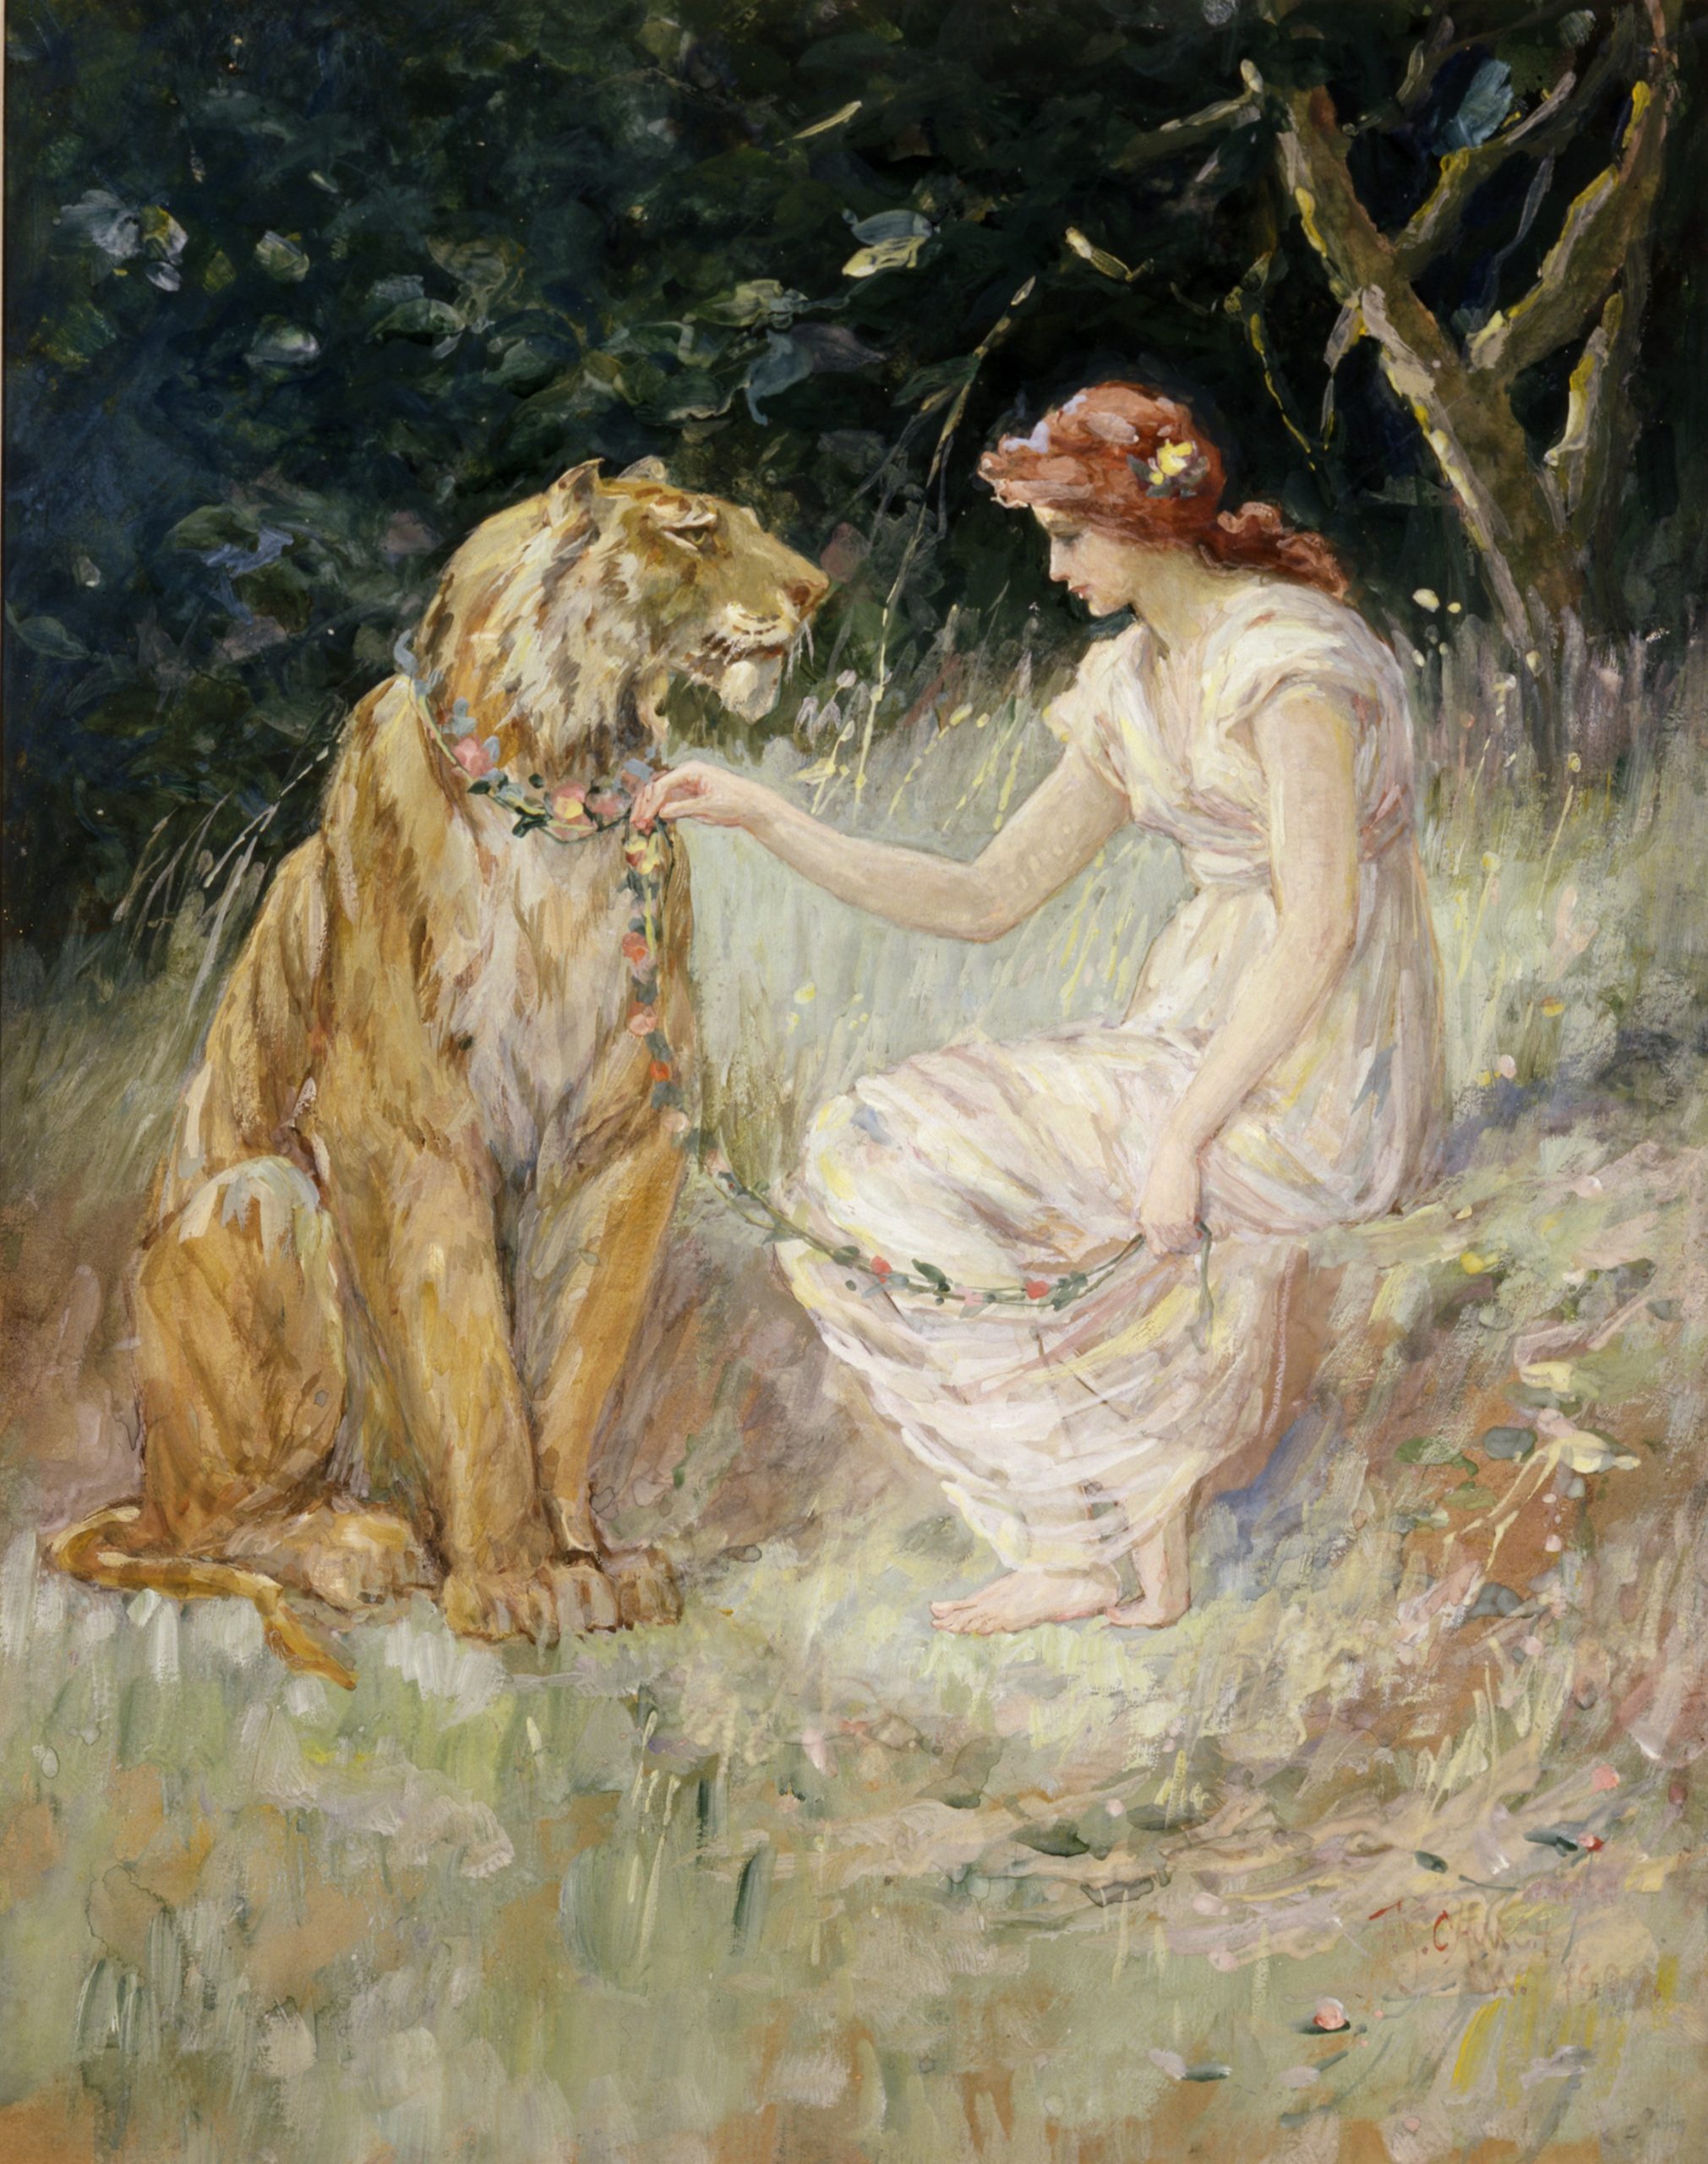 A woman kneels in a grassy meadow next to a tiger, placing her right hand on the tiger's chin.